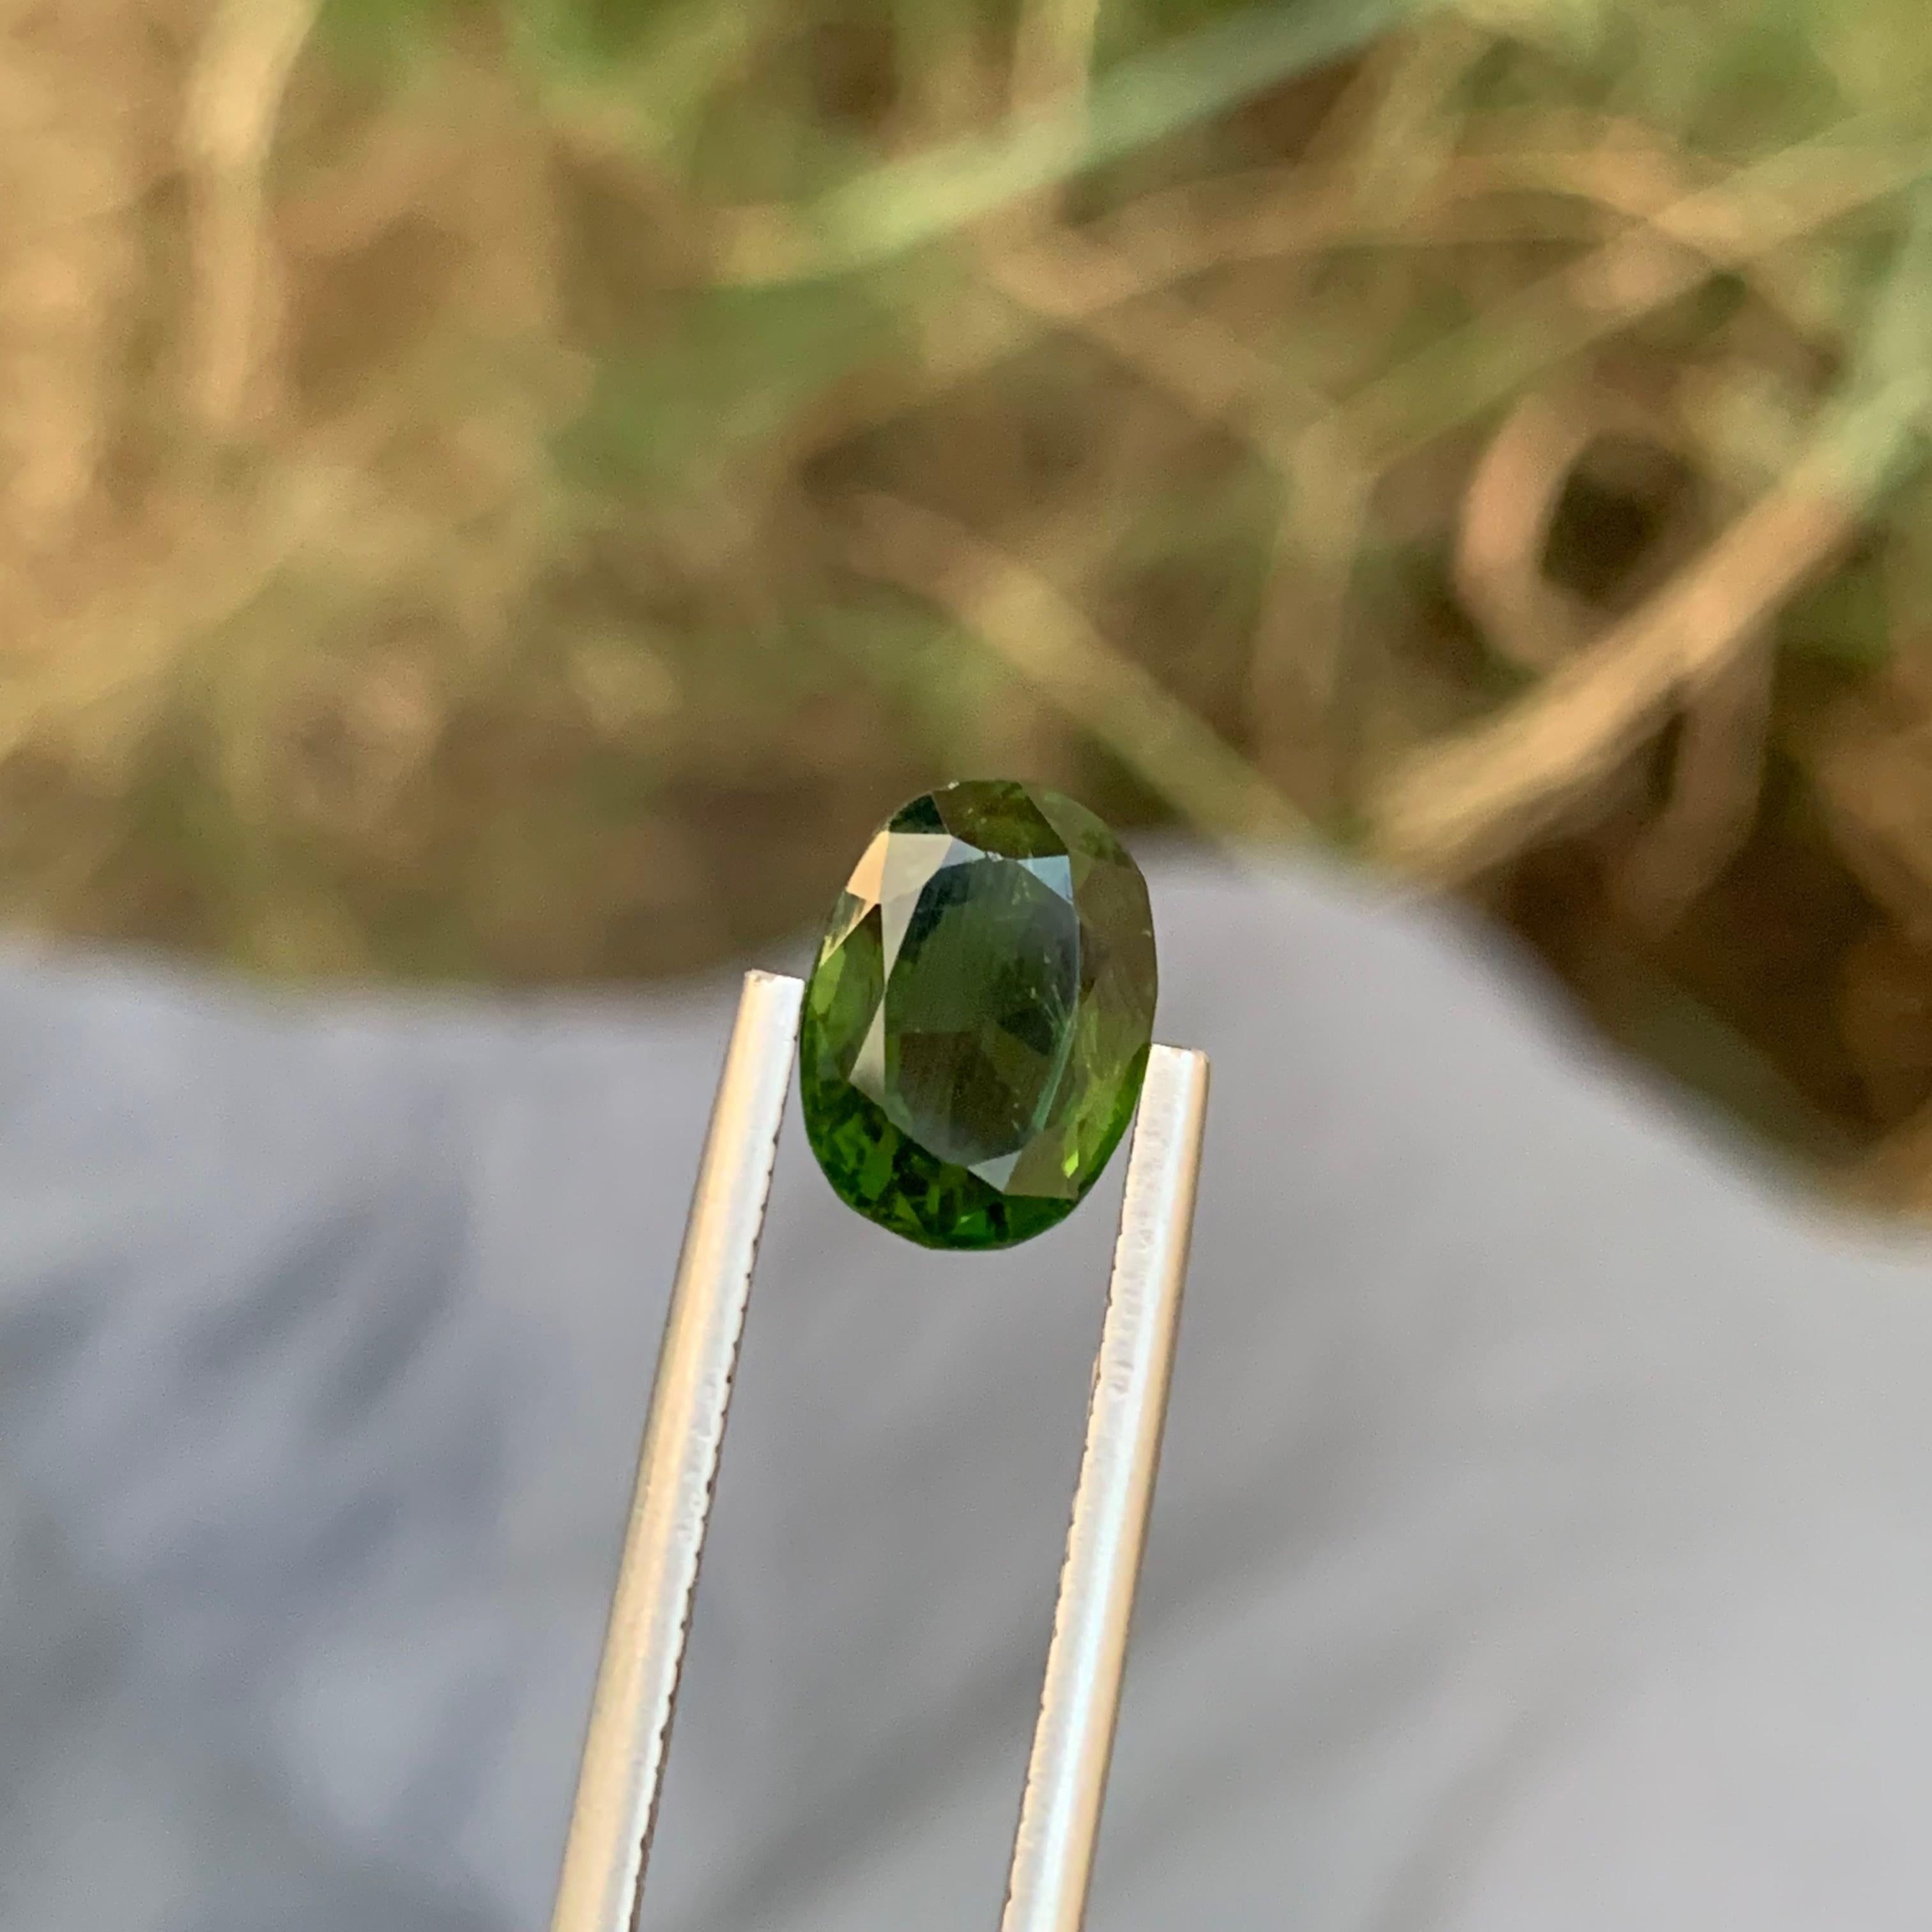 Faceted Tourmaline 
Weight: 3.25 Carats 
Dimension: 10.3x7.5x5.6 Mm
Origin: Africa 
Shape: Oval
Treatment: Non
Color: Dark Green
.
Dark green tourmaline, also known as chrome tourmaline, is a captivating variety of tourmaline that ranges in color